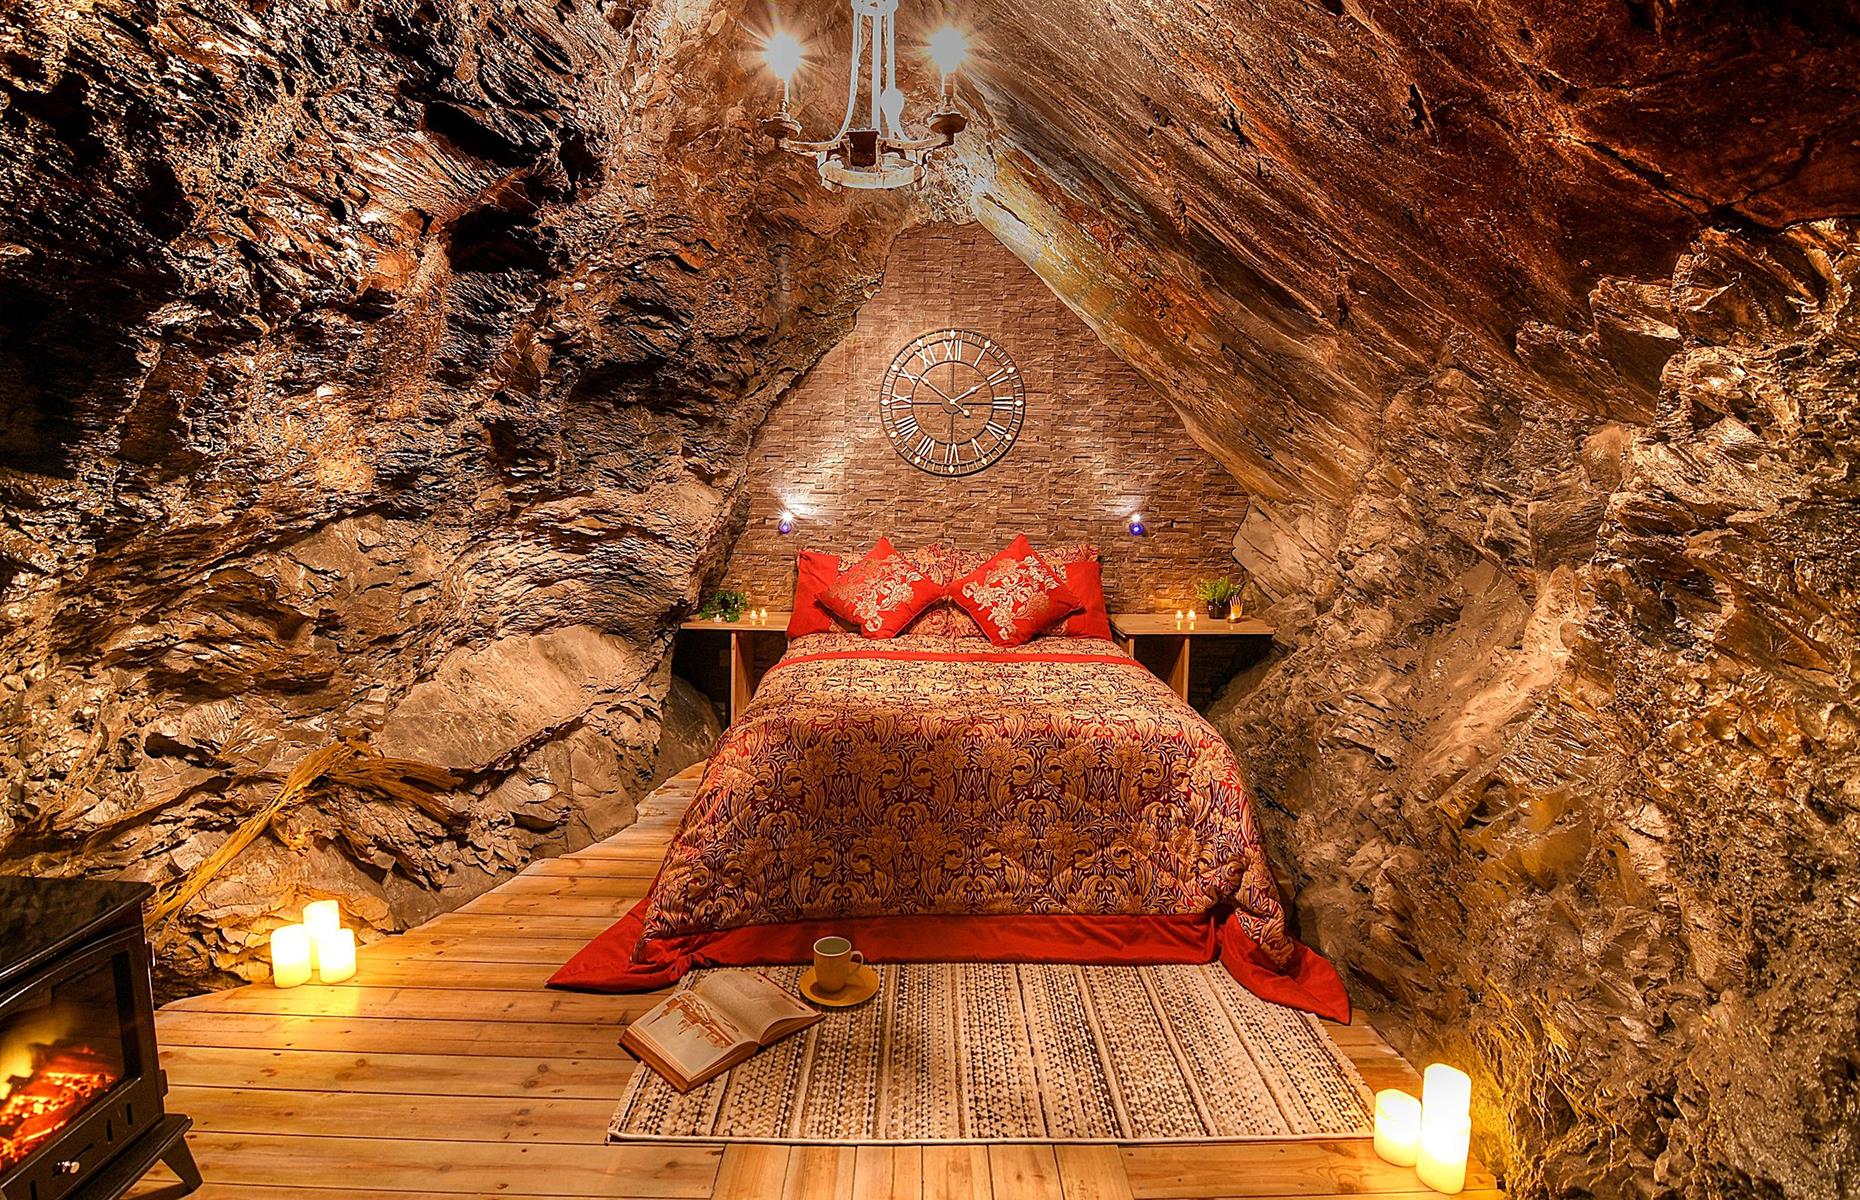 <p>There's plenty of unique accommodation in the world, whether it's up among the trees, set precariously on a cliffside, or built to imitate a film set. But some of the most surprising places where you can stay the night aren't above ground at all.</p>  <p><strong>Whether they're deep in disused mines, carved out of rocky cliffside, or squeezed into claustrophobic caverns, click through this gallery to discover Earth's most astonishing underground stays...</strong></p>